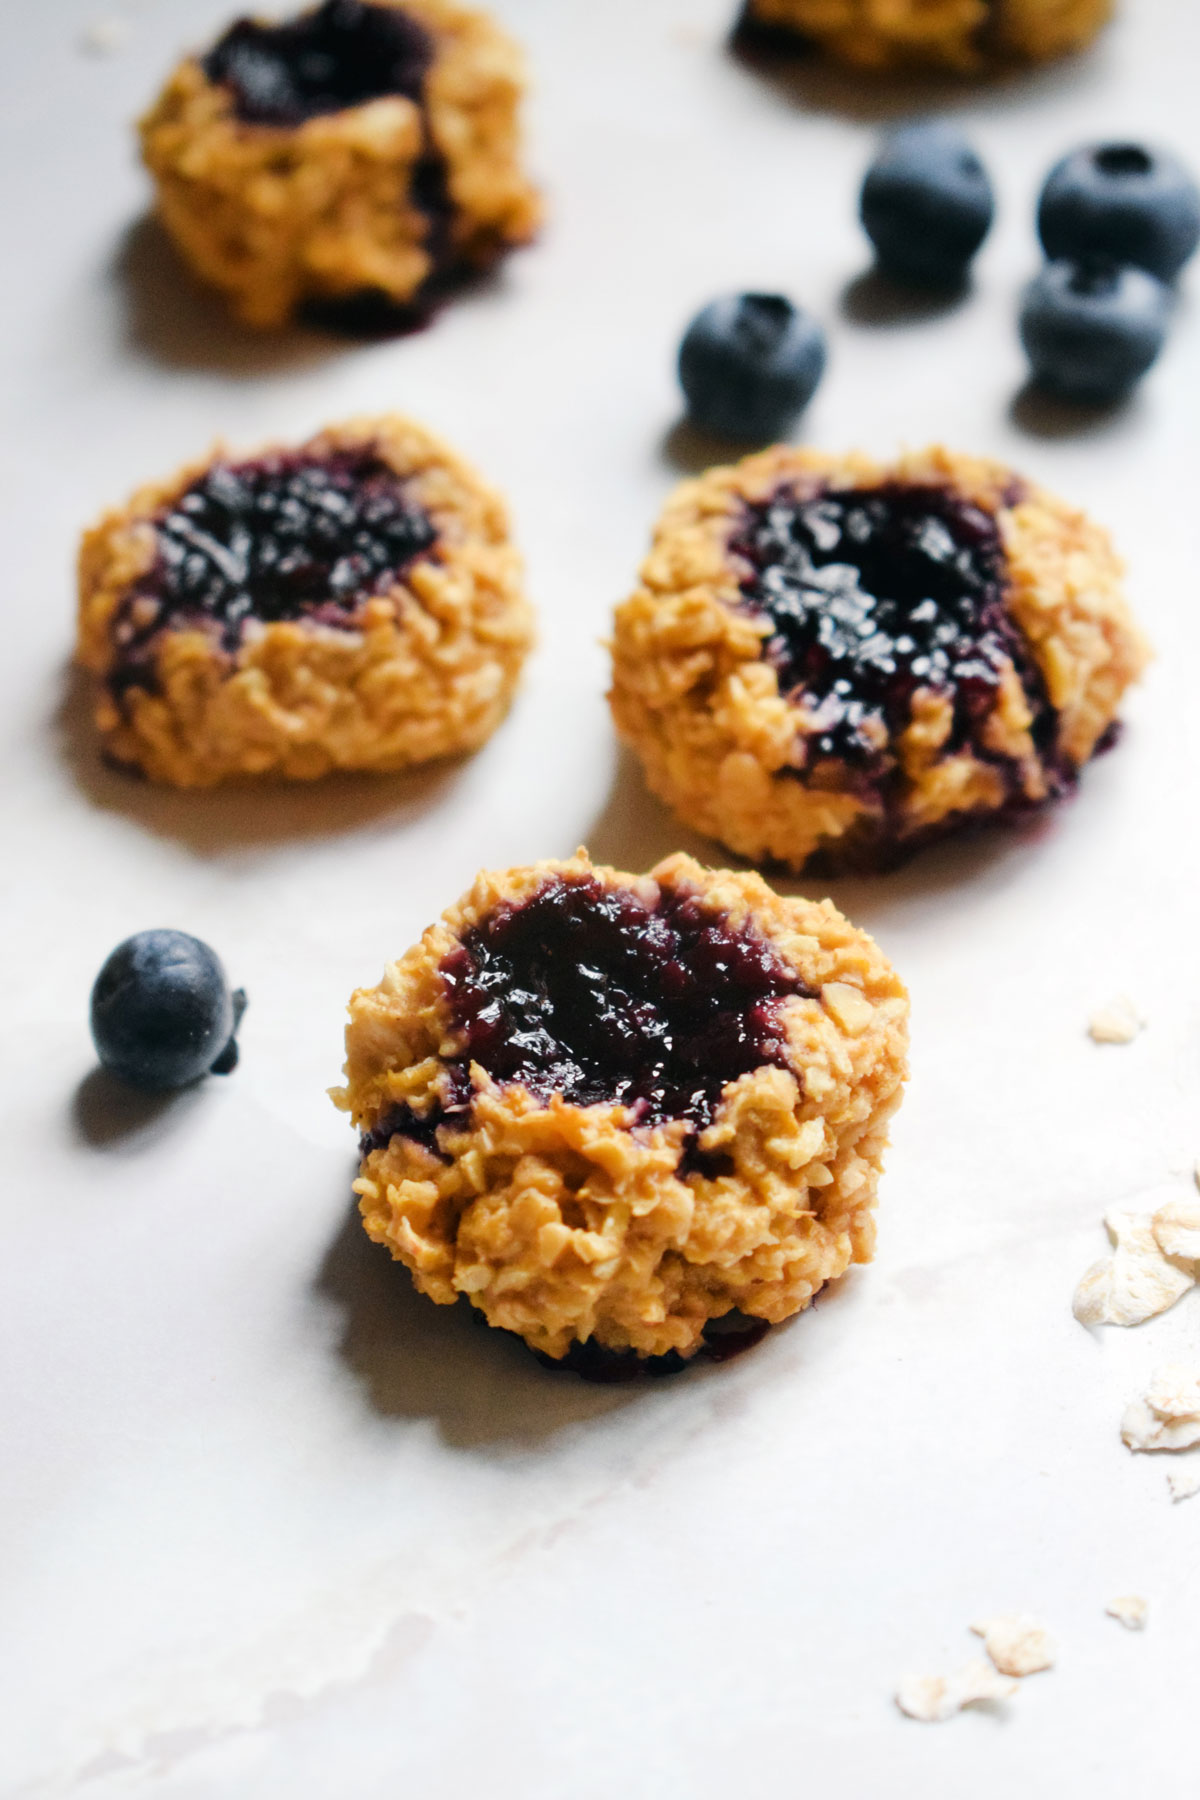 Sweet Potato and Blueberry Jam Cookies - Let's Eat Smart